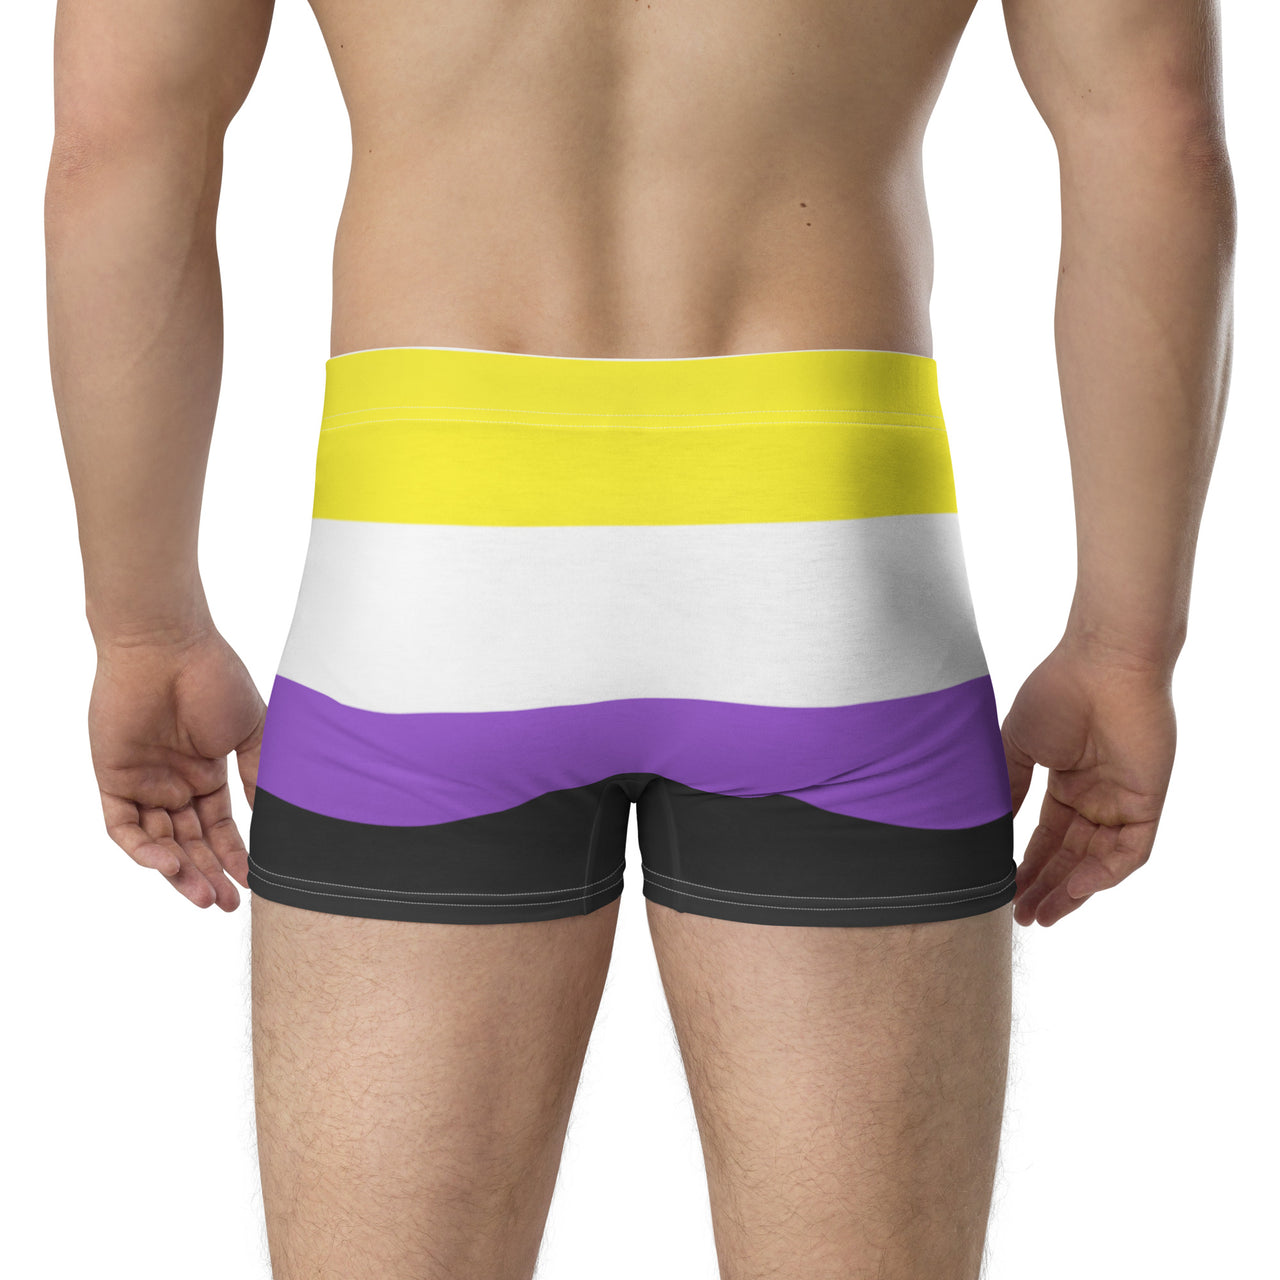 Non Binary Flag LGBTQ Boxer for Her/Him or They/Them SHAVA